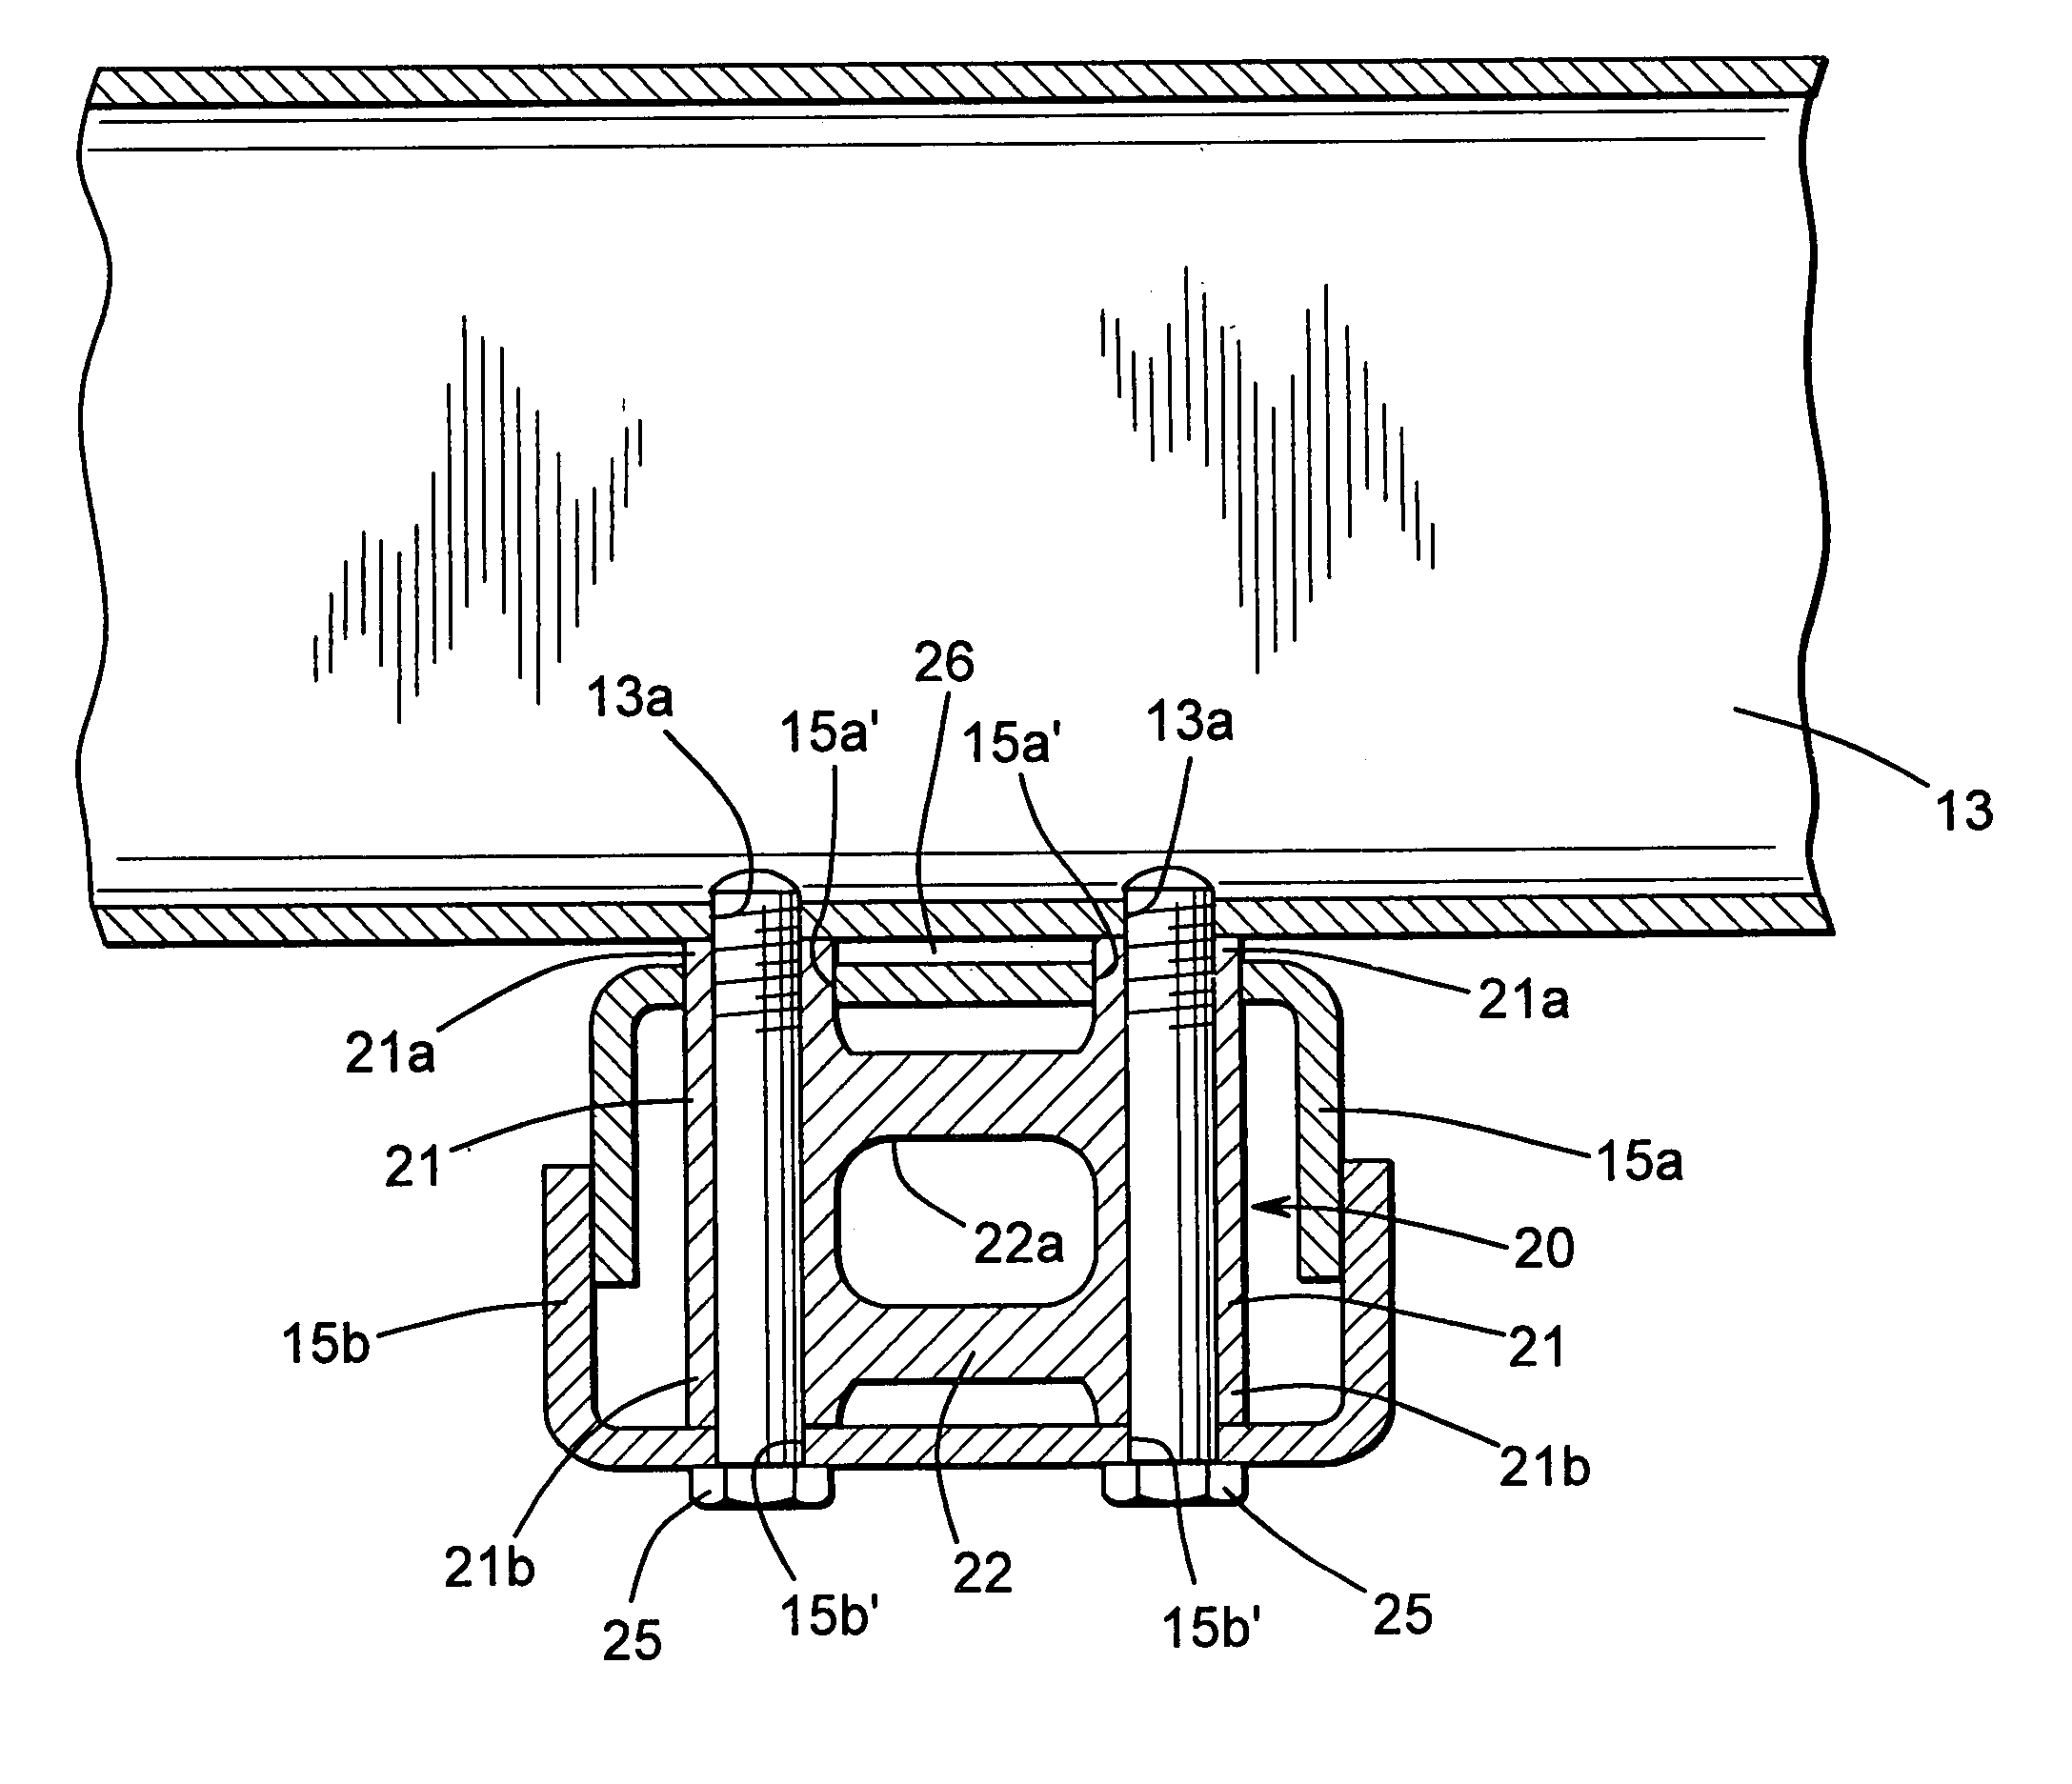 Offset joint between structural members in a vehicle frame assembly to facilitate a coating process